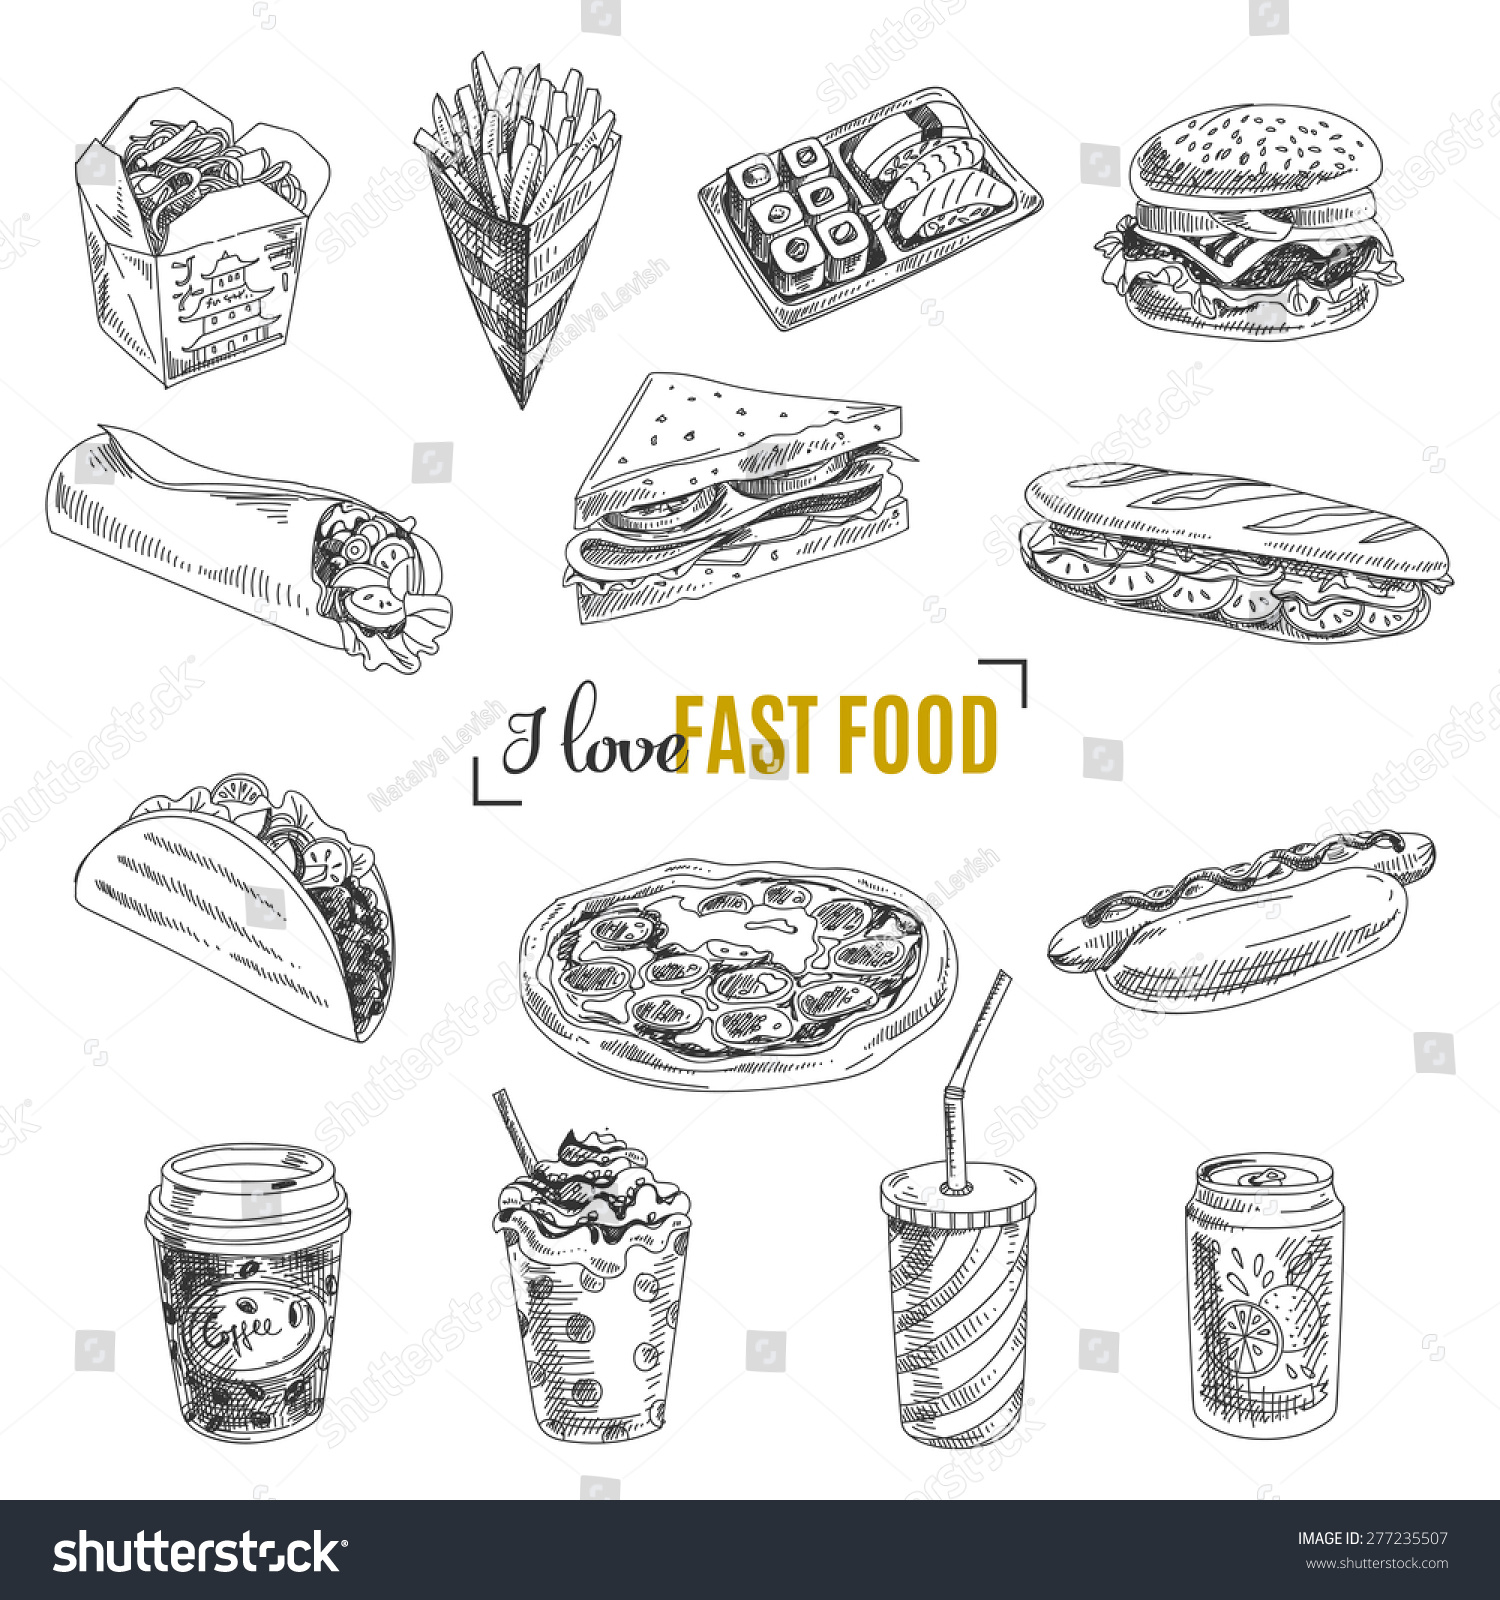 Vector set of fast food. Vector illustration in sketch style. Hand drawn design elements. #277235507